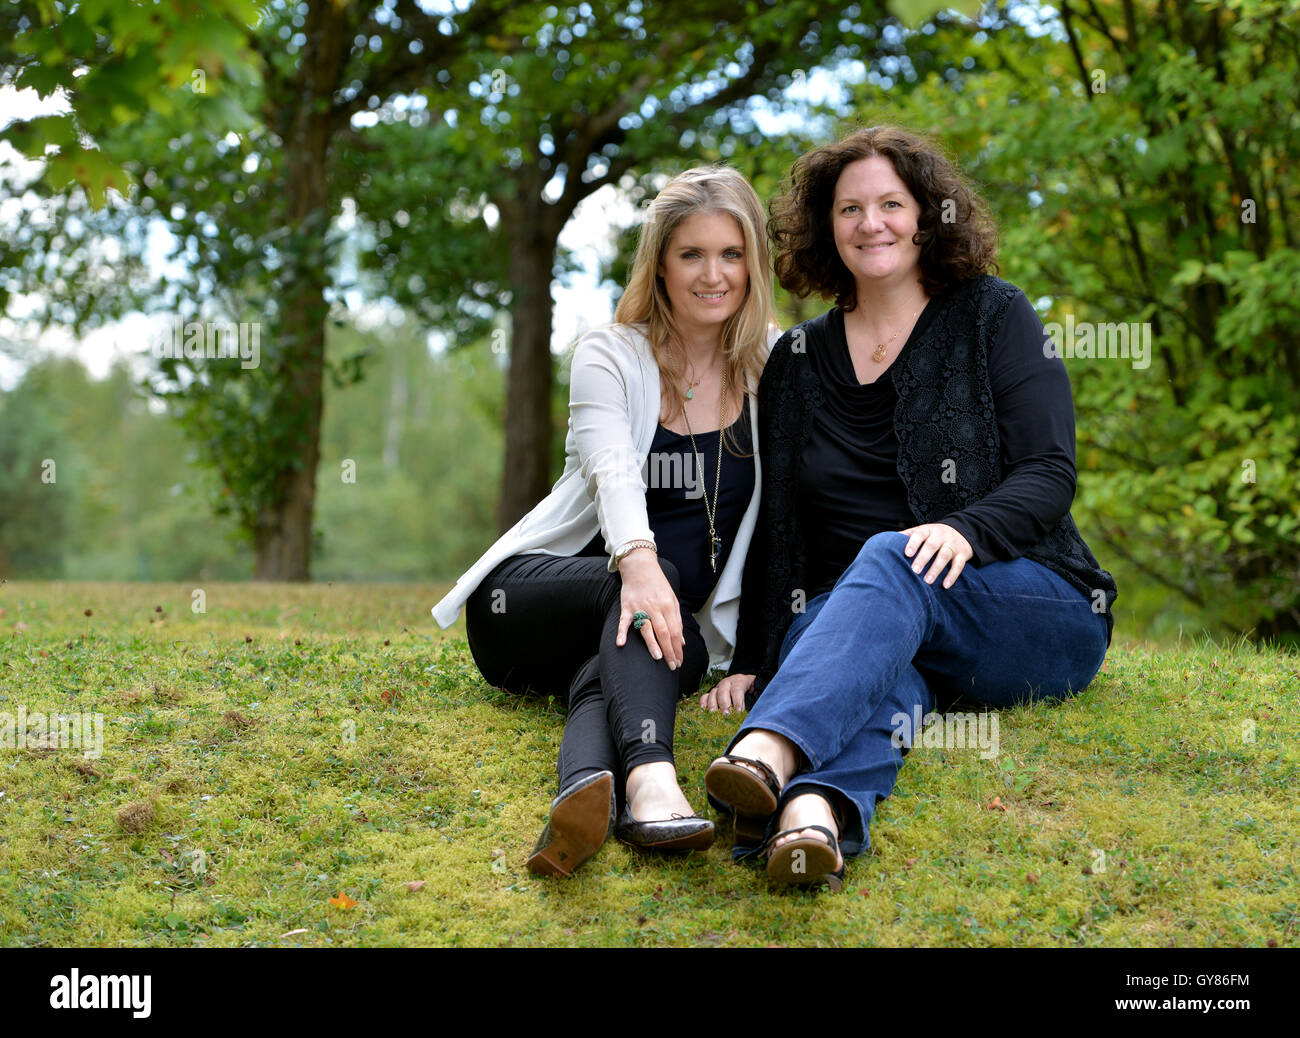 Birkenfeld, Germany. 17th Sep, 2016. Former model Felicity Gain (L) from London and Siobhan Kirsten Mansfield pose in a park in Birkenfeld, Germany, 17 September 2016. In 2002, 44-year-old Mansfield from Trassem, Germany donated bone marrow for Felicity Gain, now 38, which saved her life. Phoot: HARALD TITTEL/dpa/Alamy Live News Stock Photo